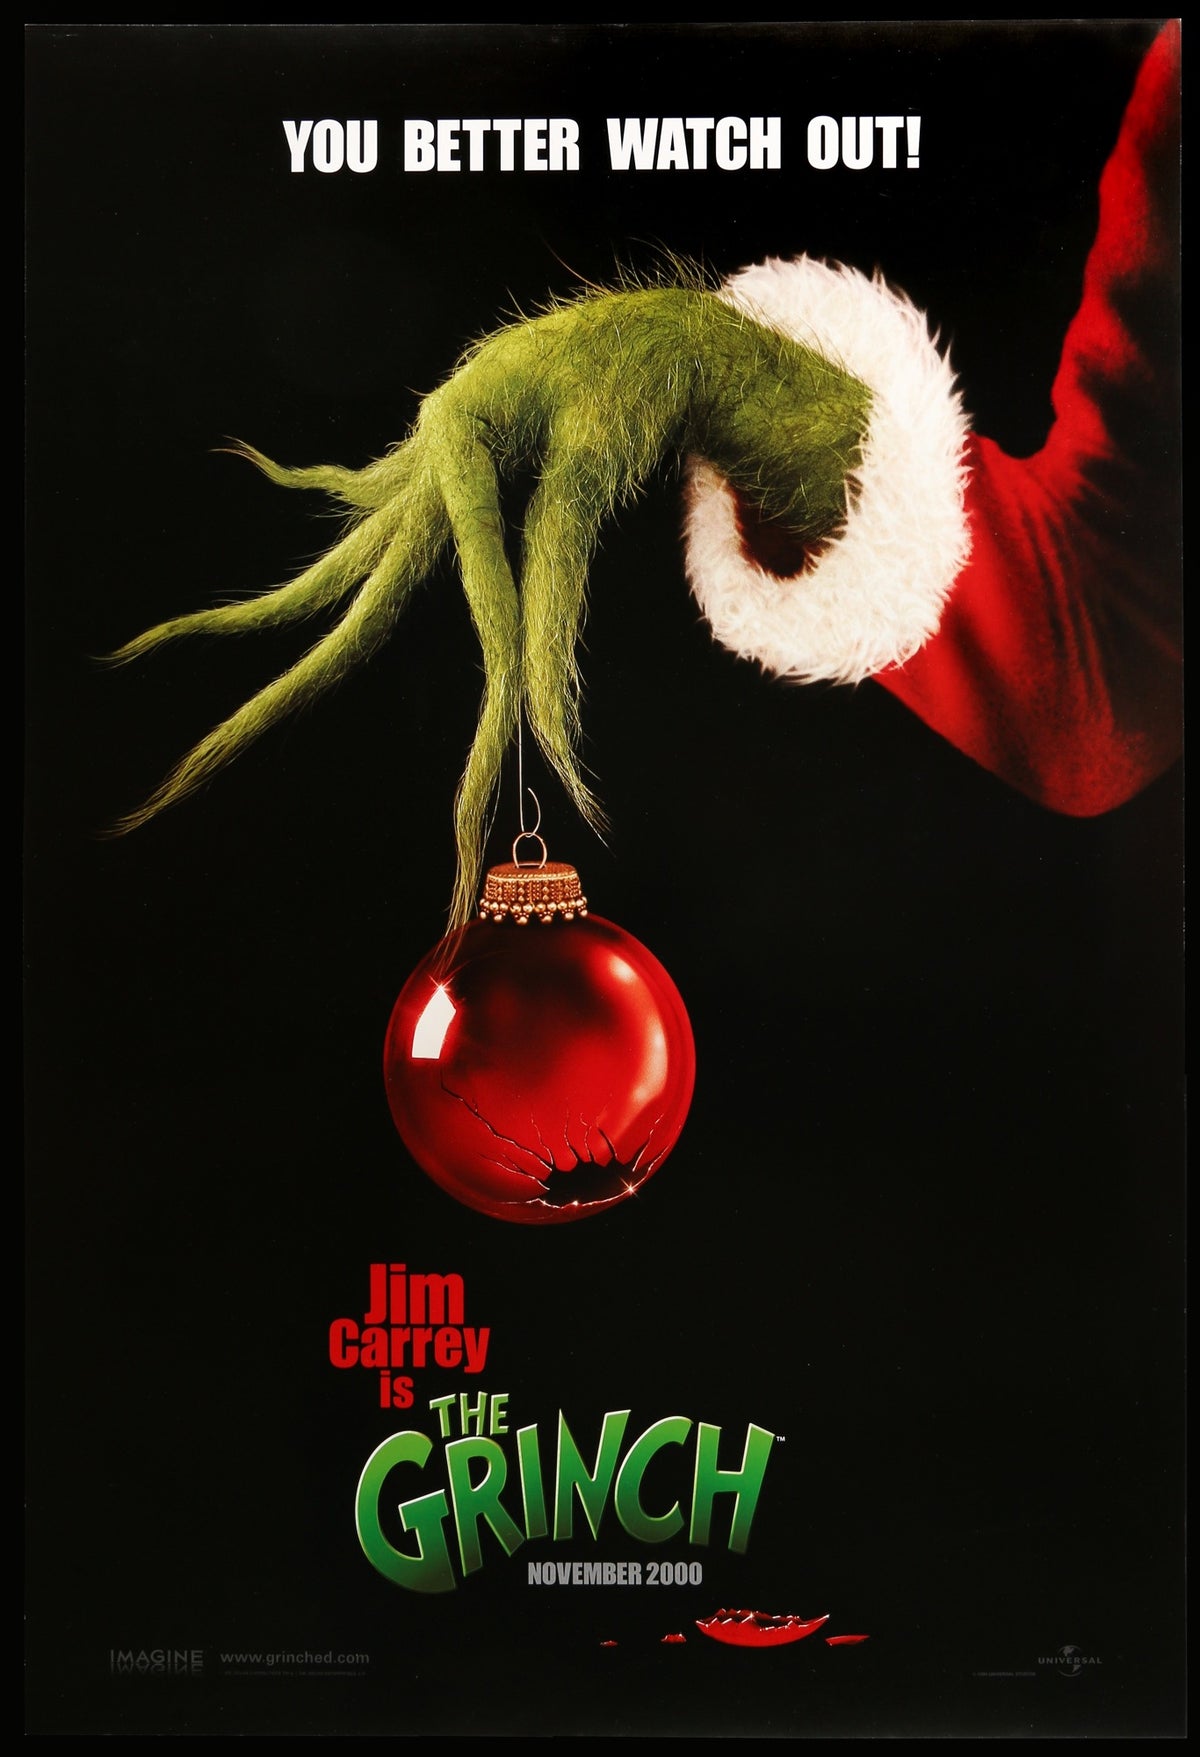 How the Grinch Stole Christmas (2000) original movie poster for sale at Original Film Art